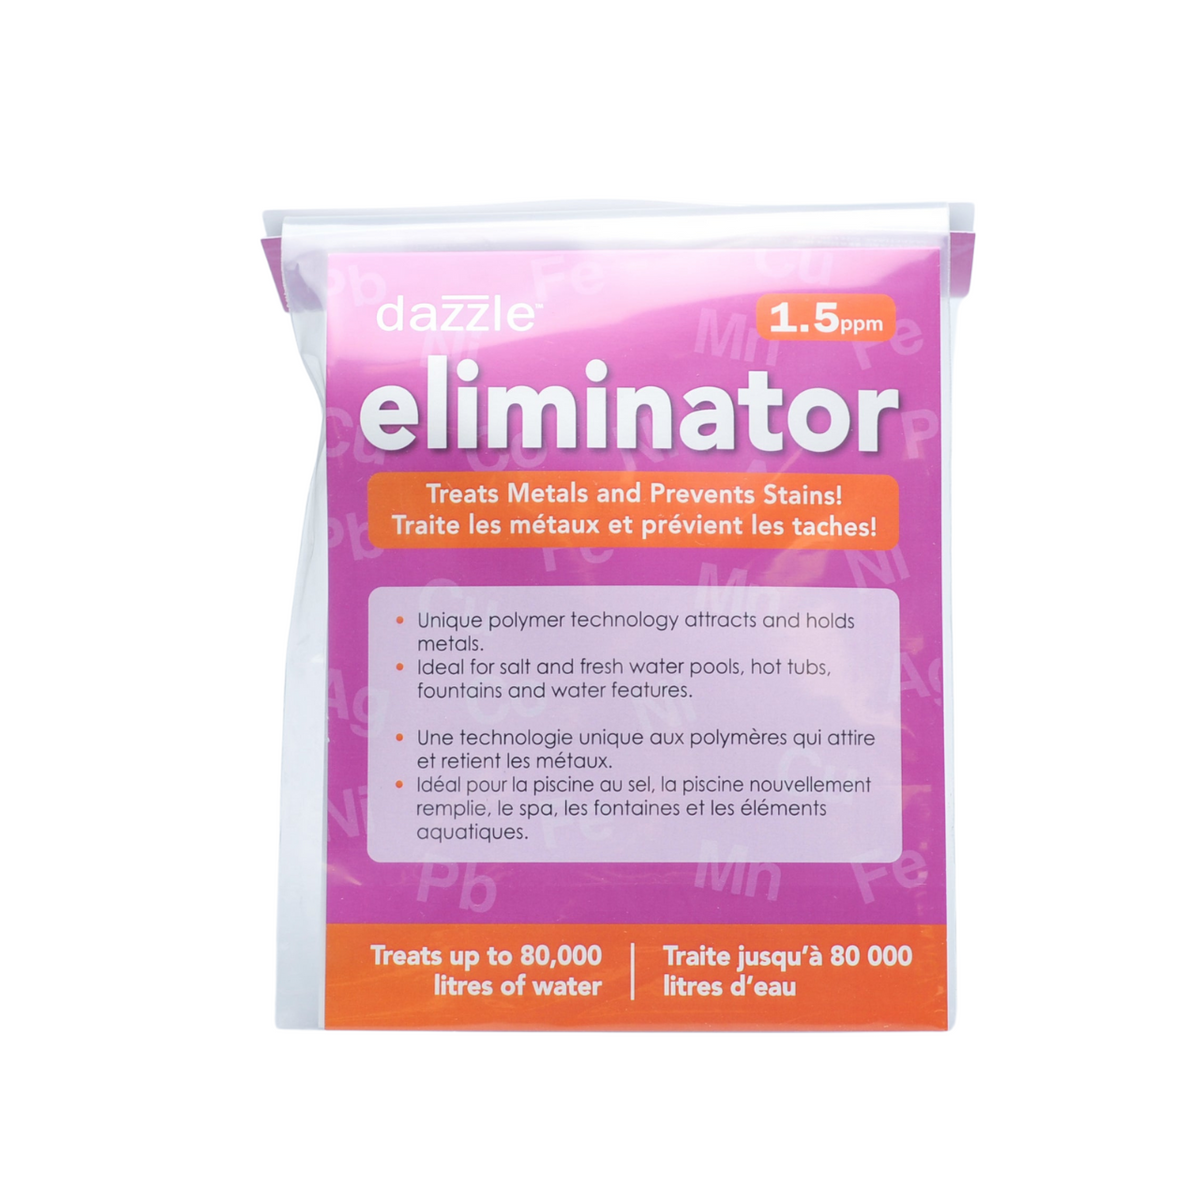 Dazzle™ Eliminator - Treats Metals and Prevents Stains! (1.5 ppm)